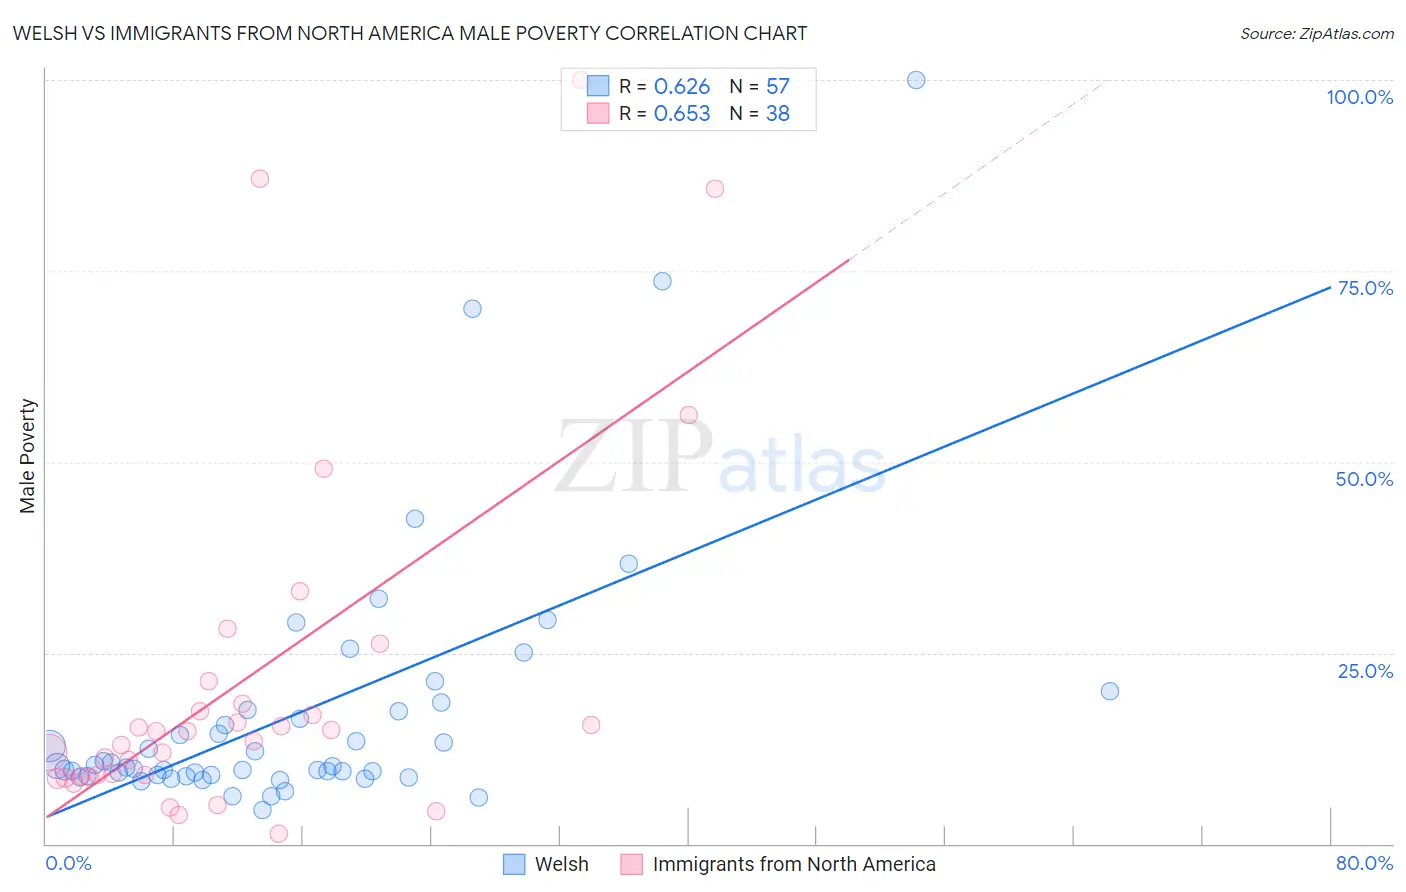 Welsh vs Immigrants from North America Male Poverty